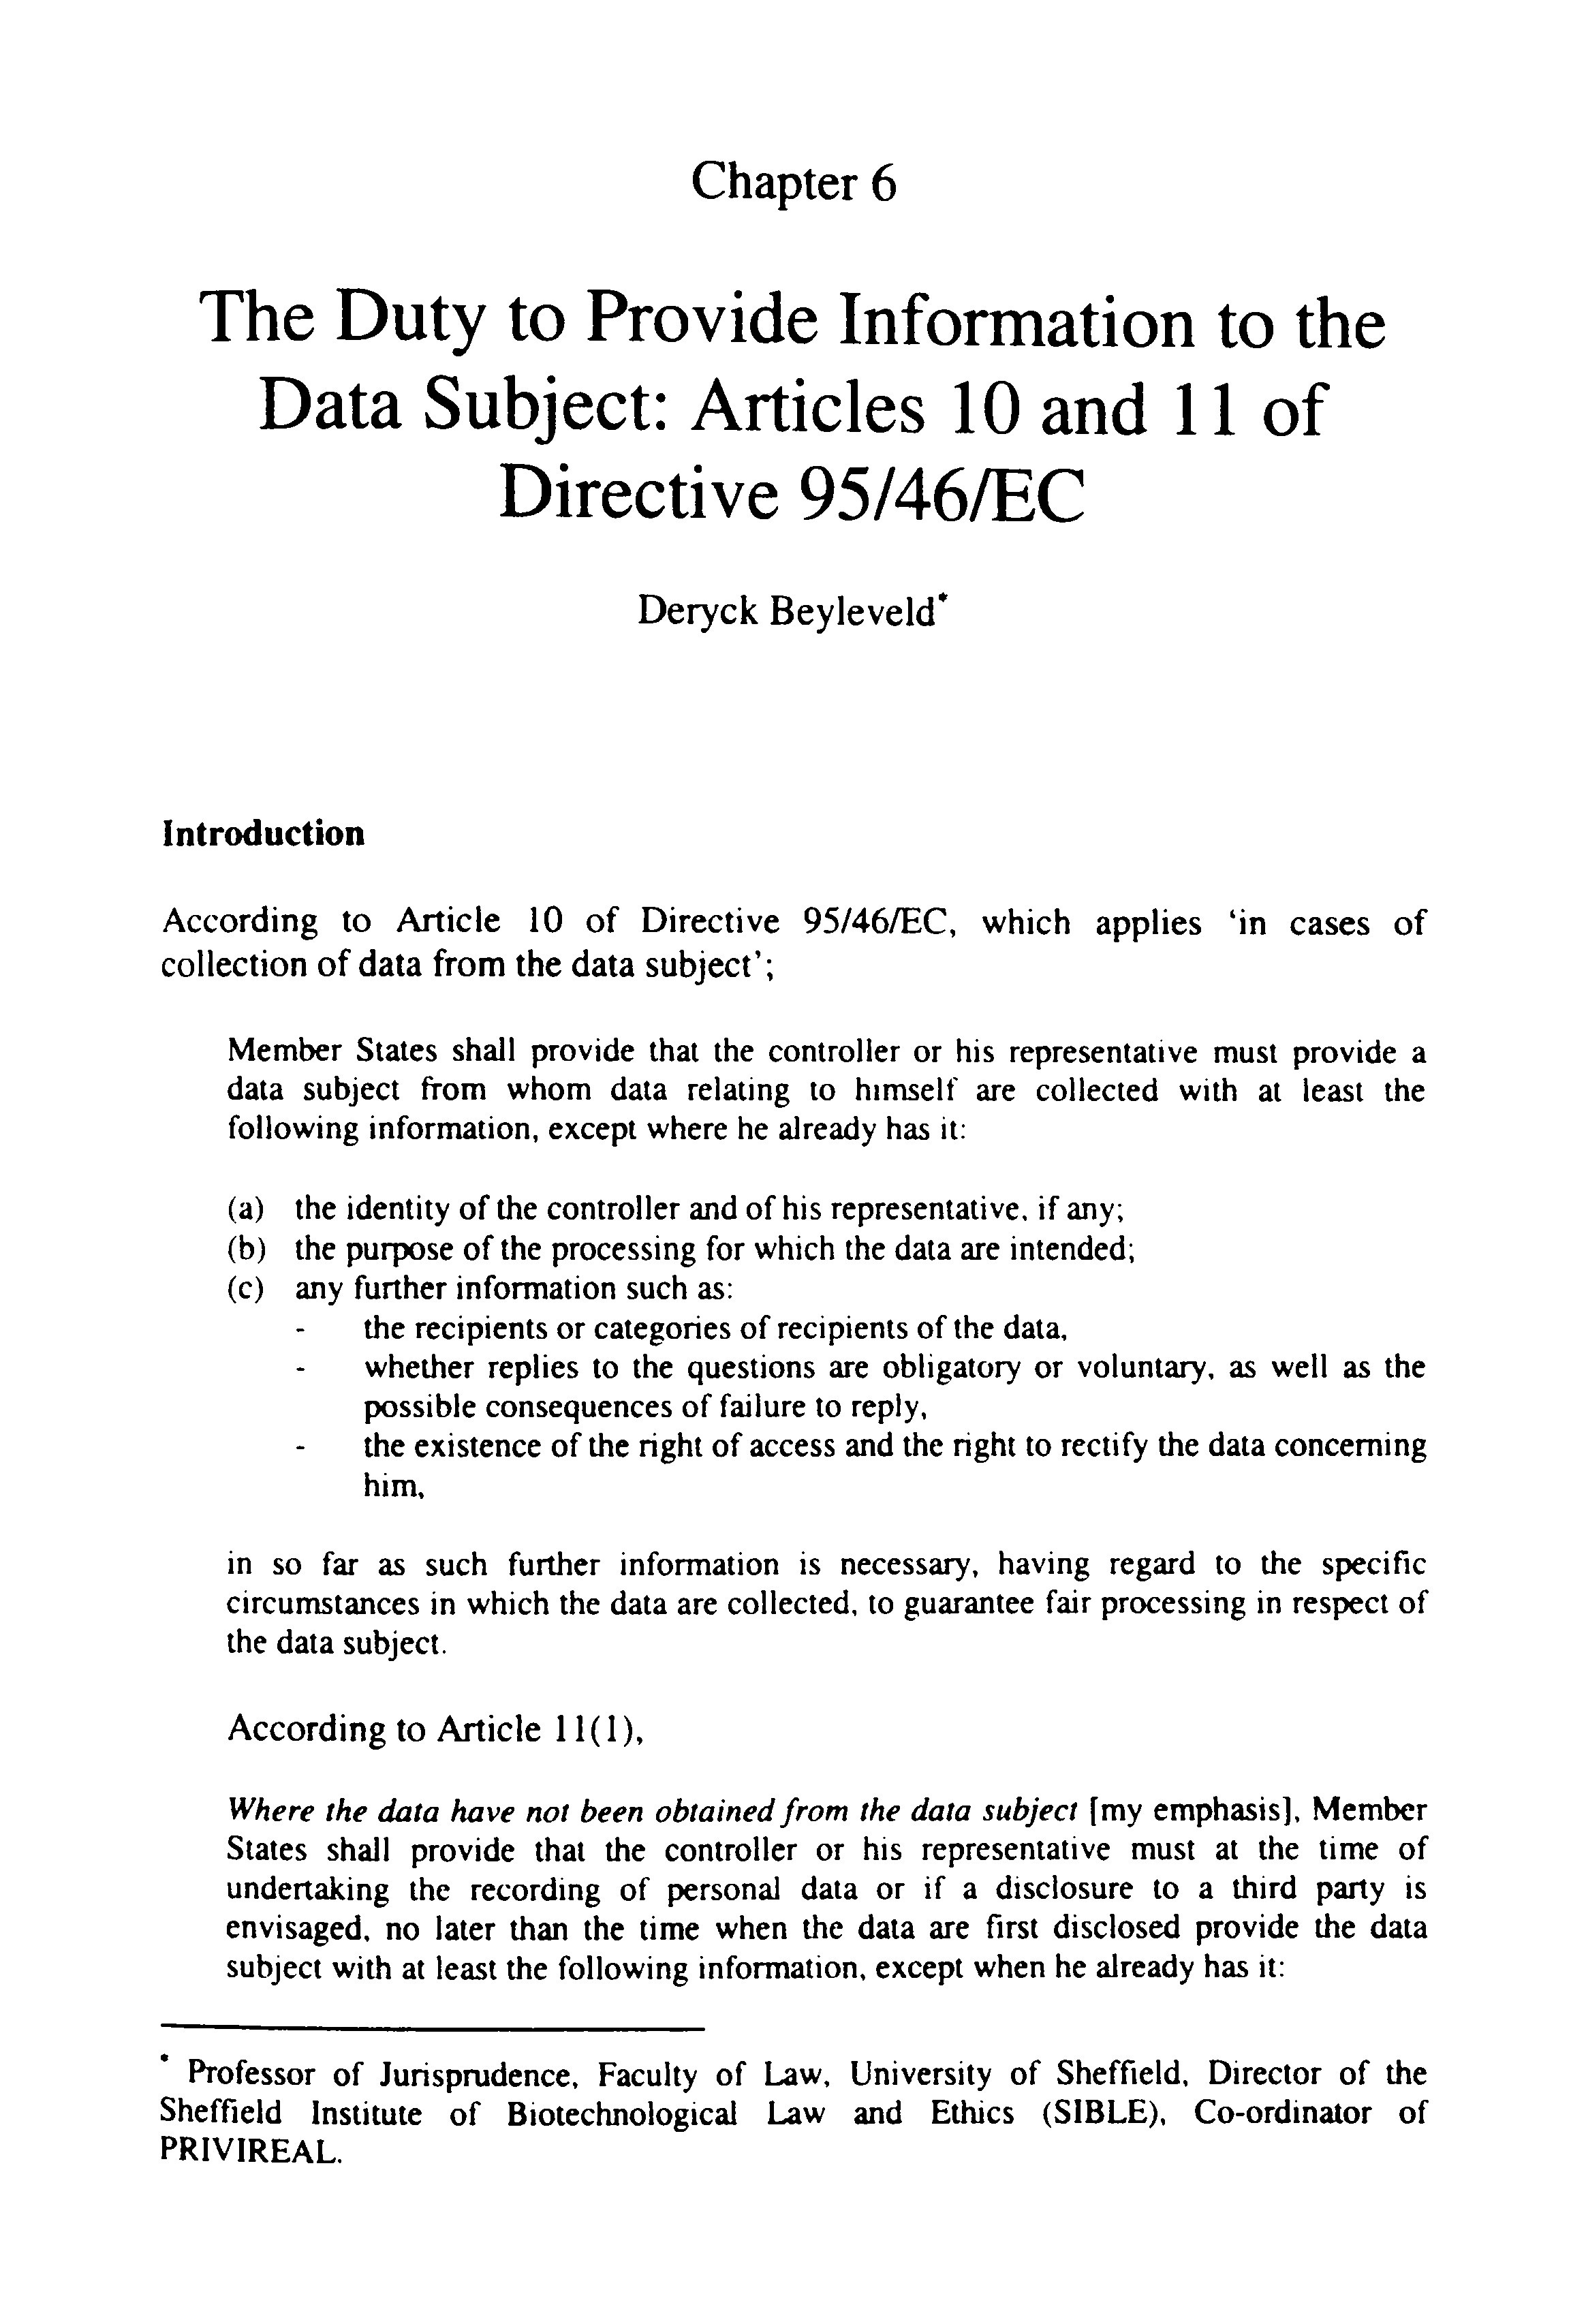 'The Duty to provide Information to the Data Subject: Articles 10 and 11 of Directive 95/46/EC' Thumbnail